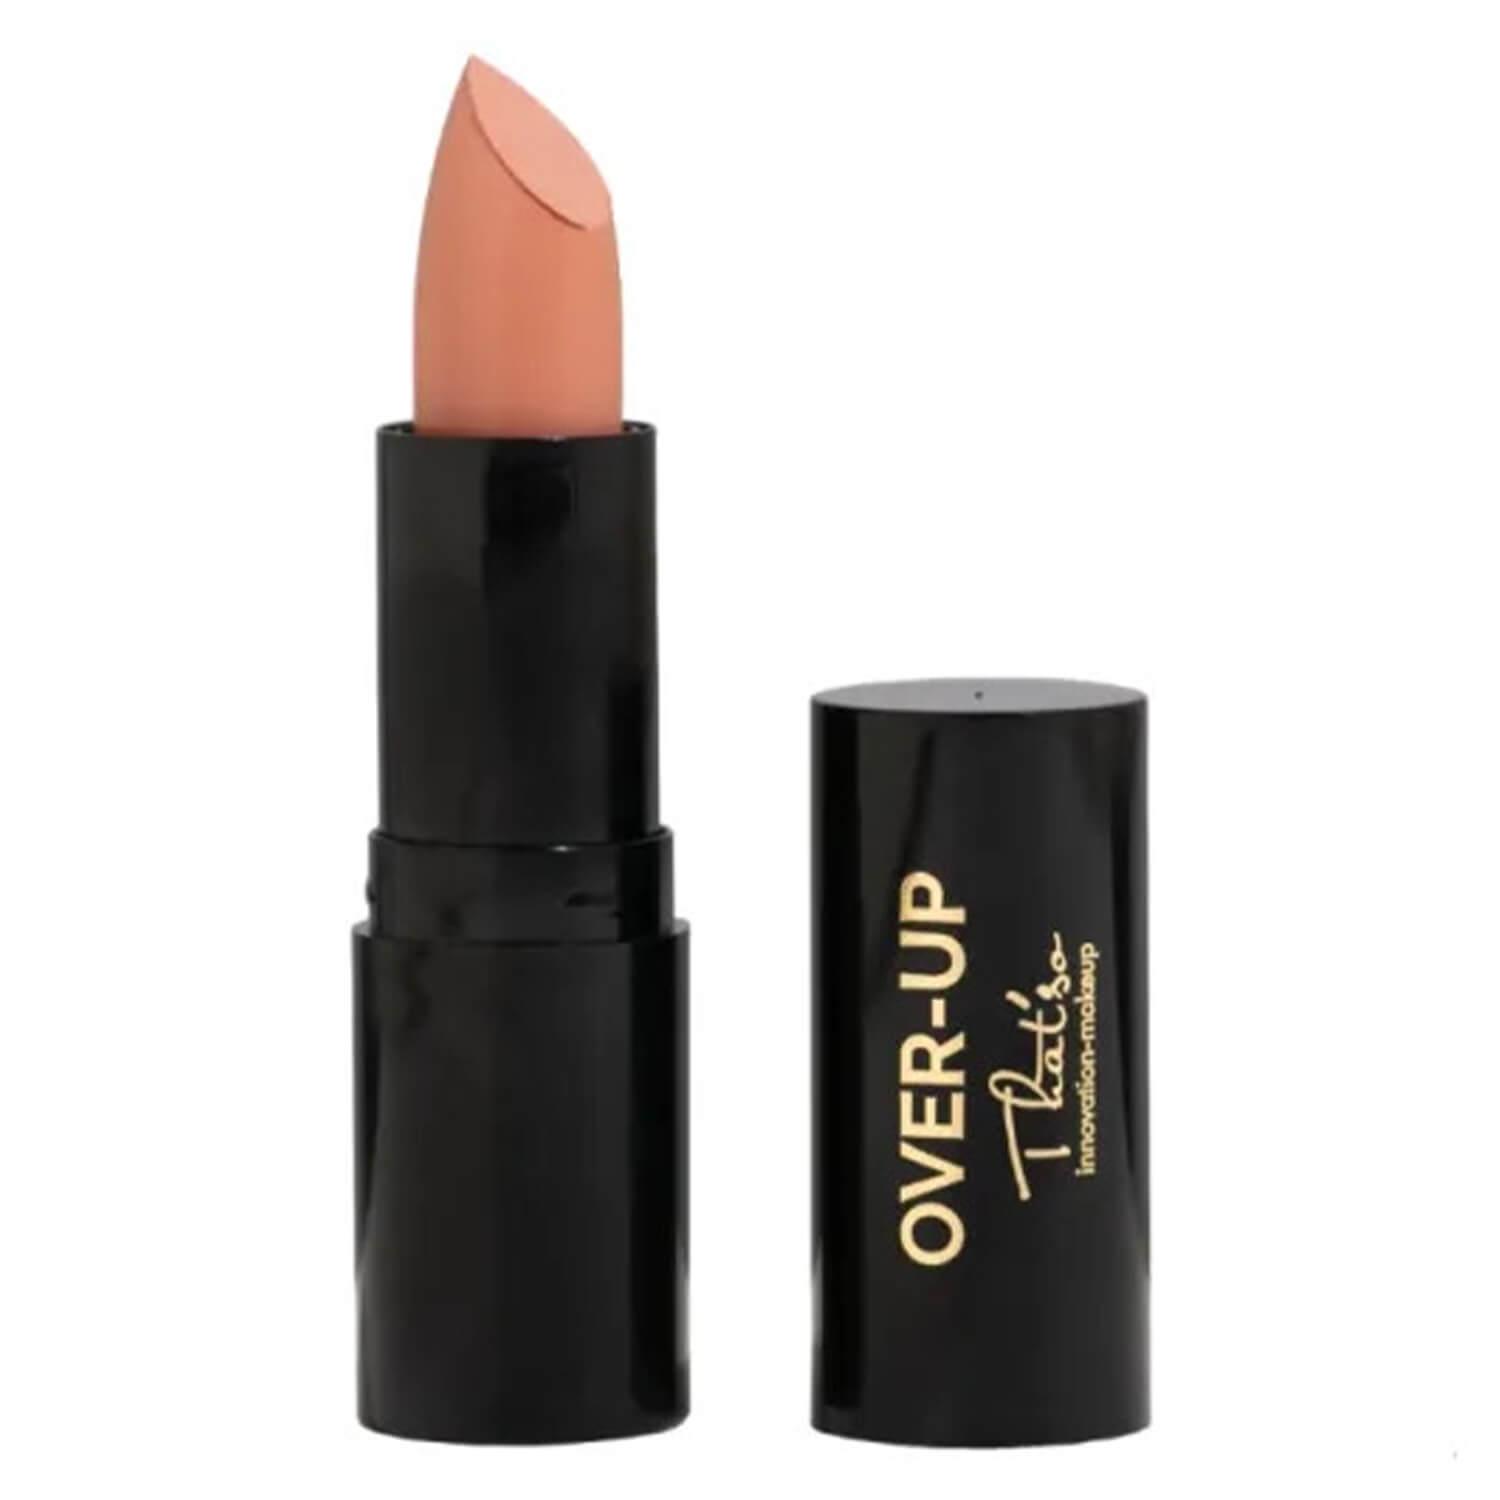 That'so - OVER UP Lipstick Nude